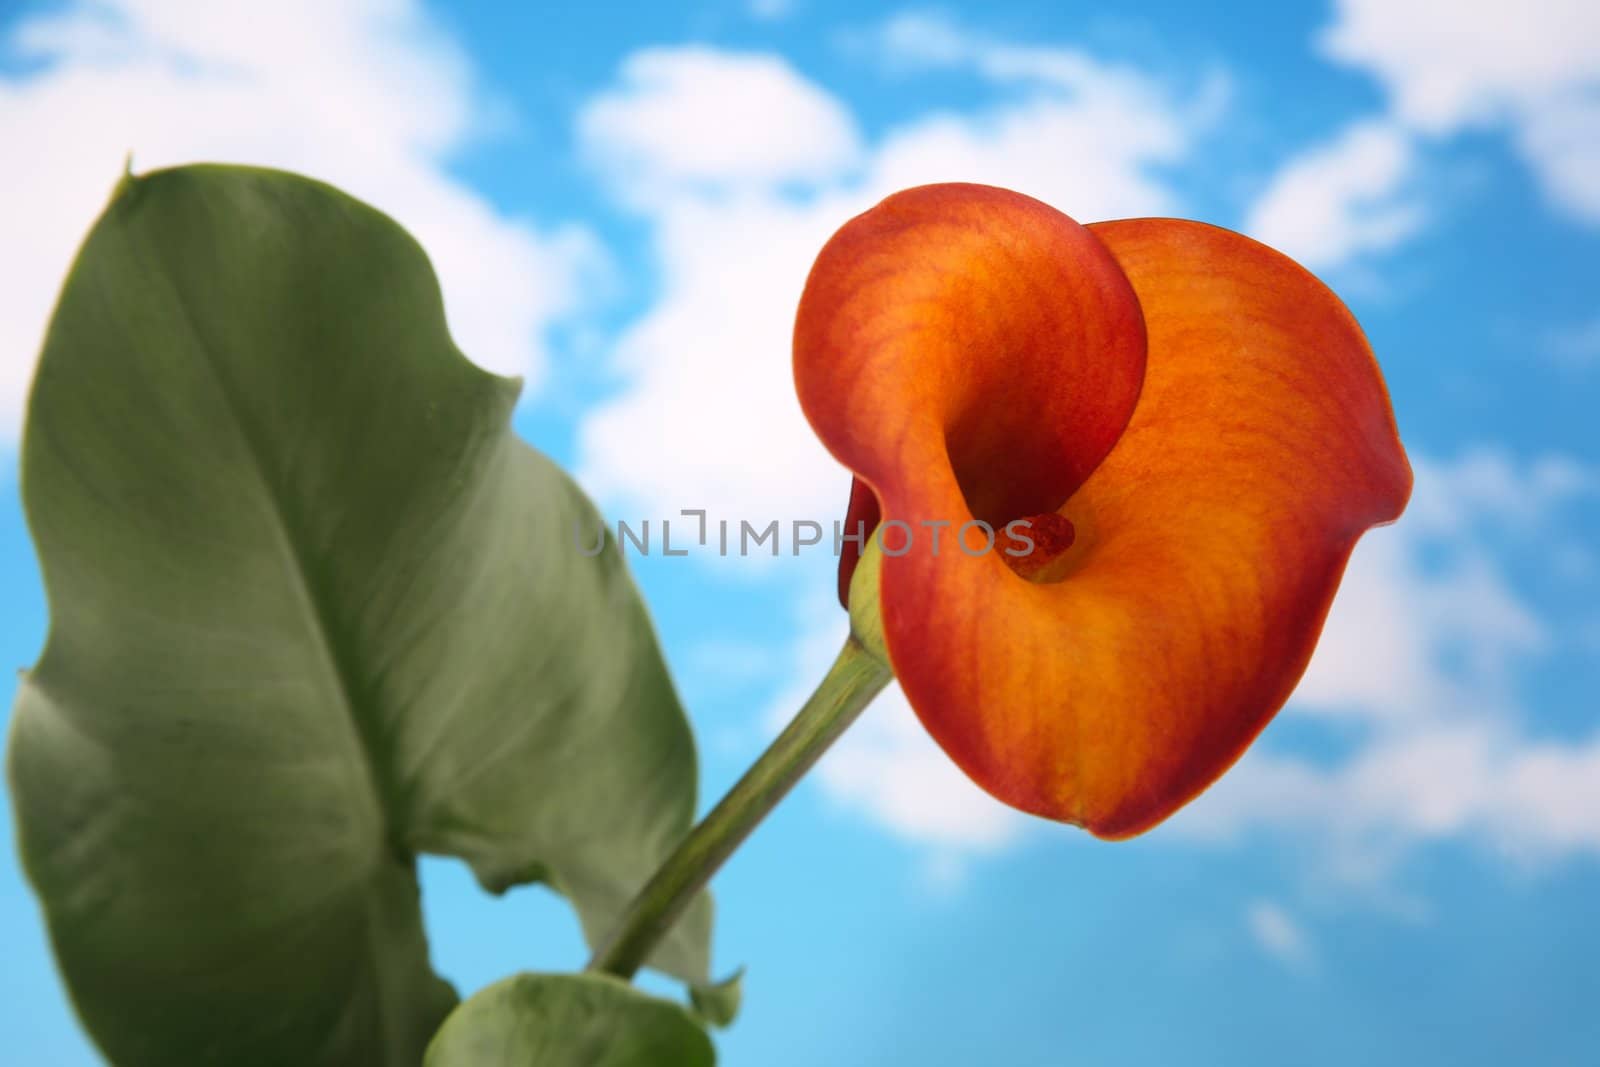 Calla lilly by scrappinstacy